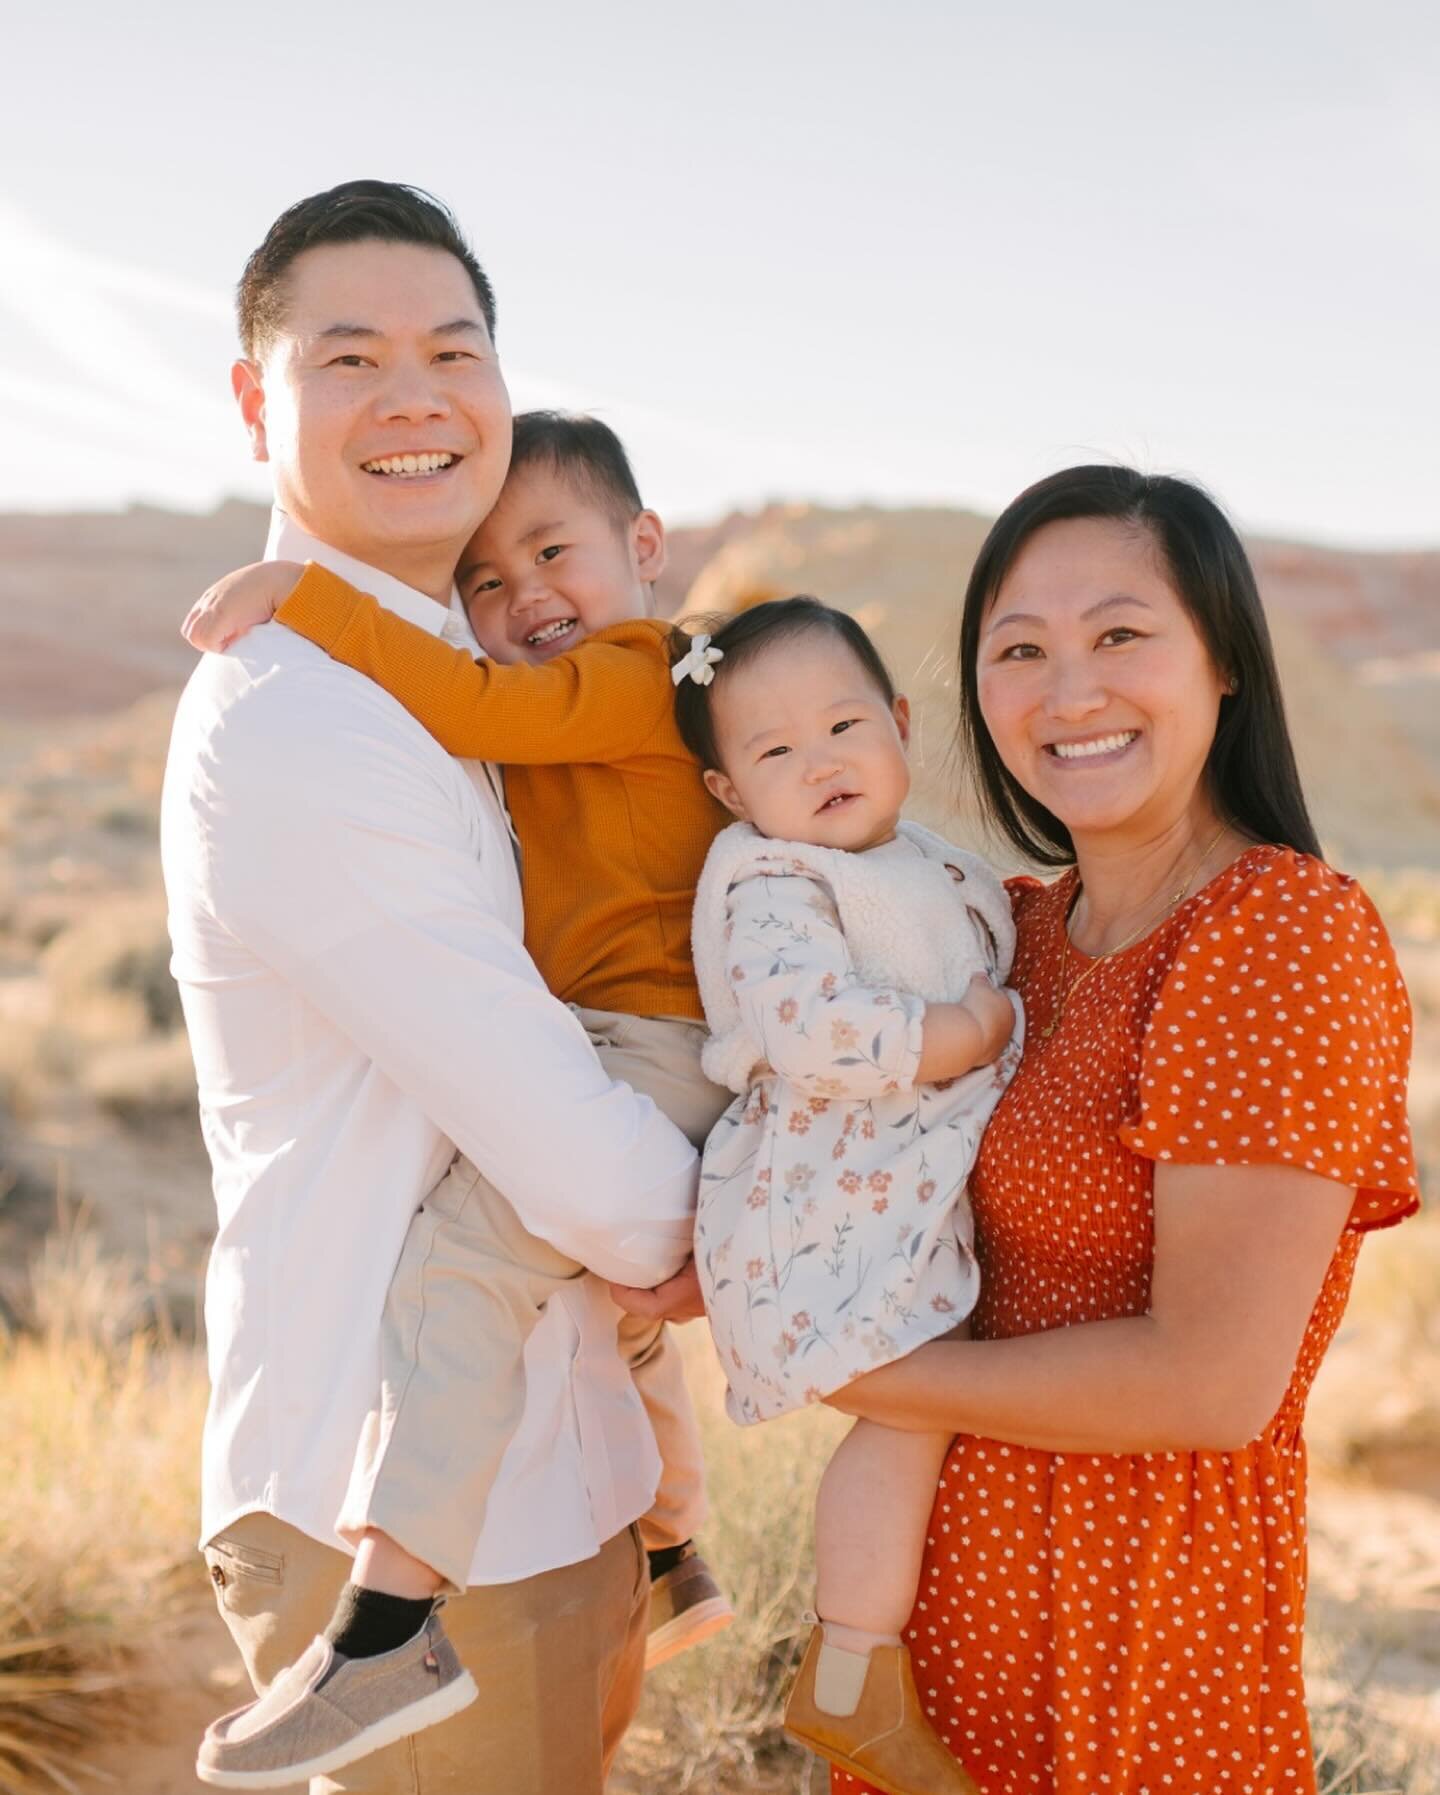 My giveaway collab with Artifact Uprising resulted in getting to work with the sweetest, most beautiful little family yesterday! Becca told me that she was so excited to win the giveaway, because these photos are their first family photos ever 🥹 

I